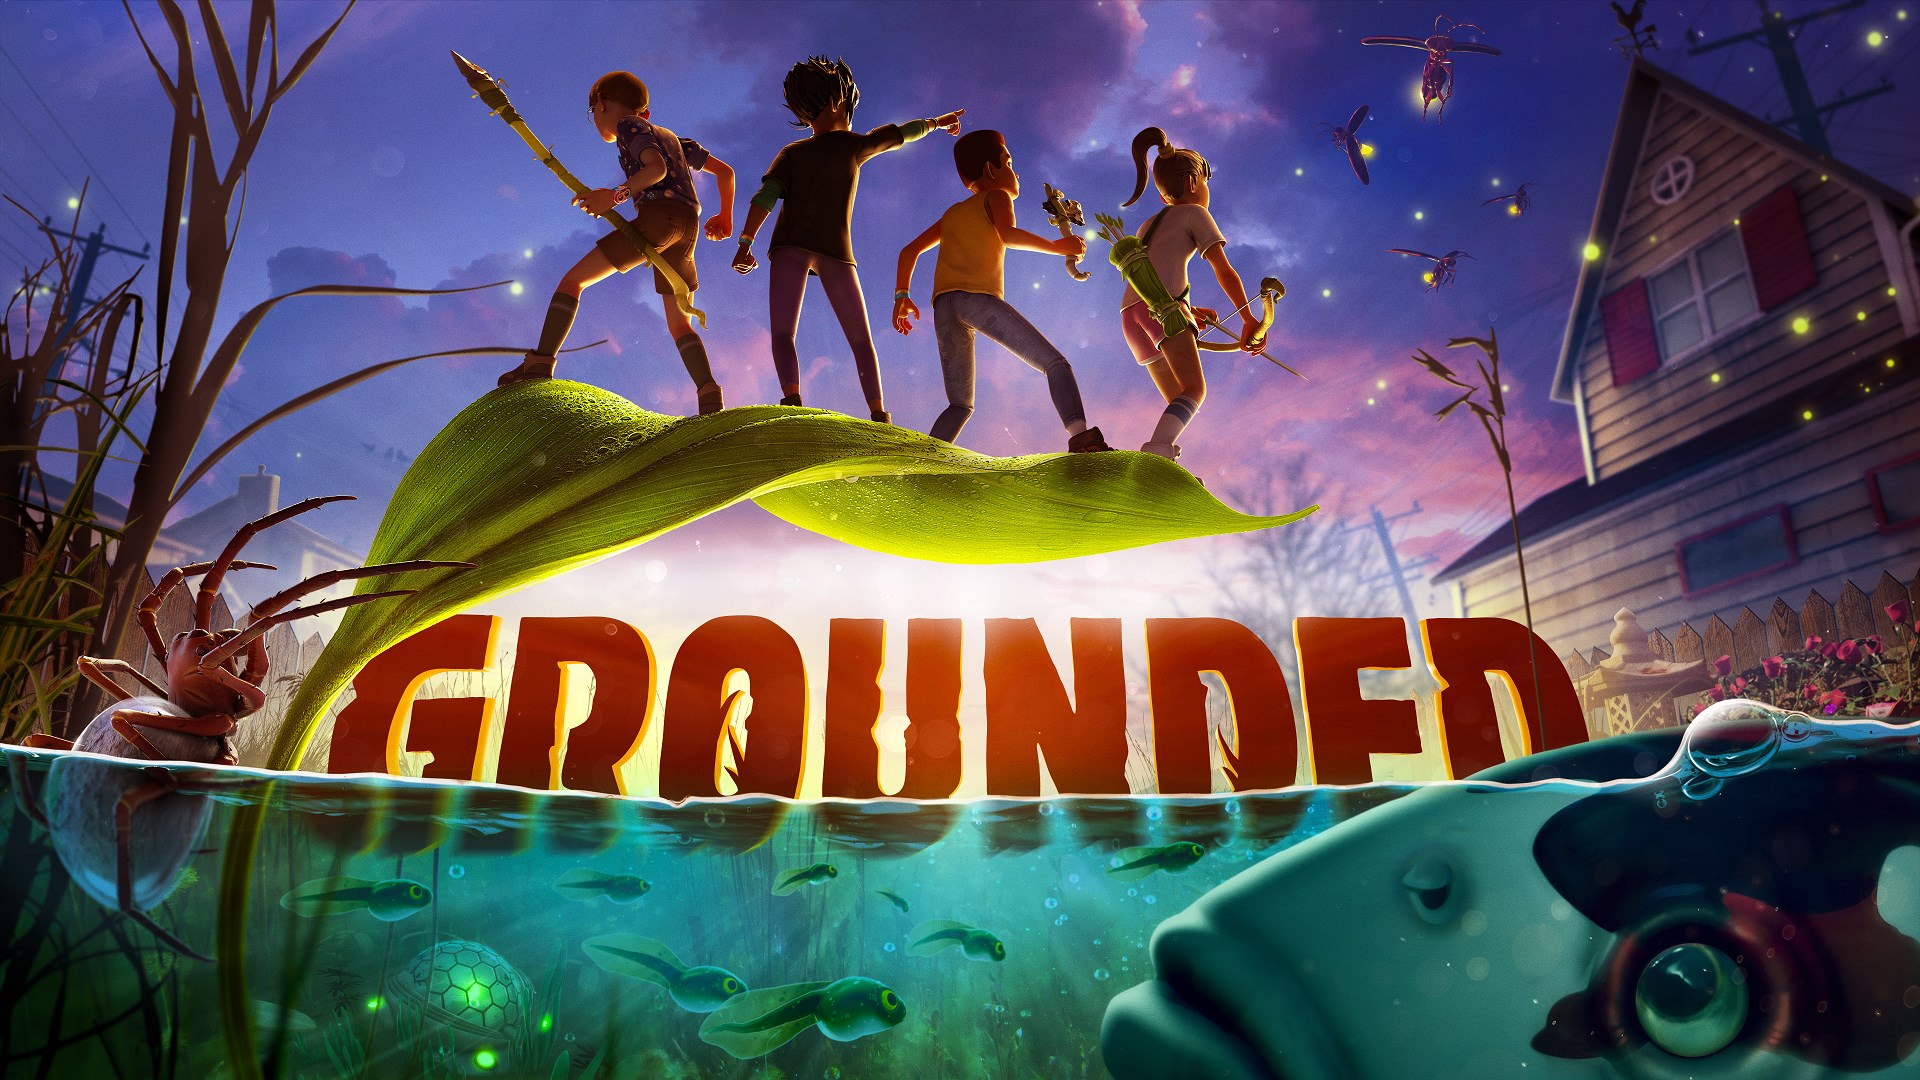 grounded xbox release date